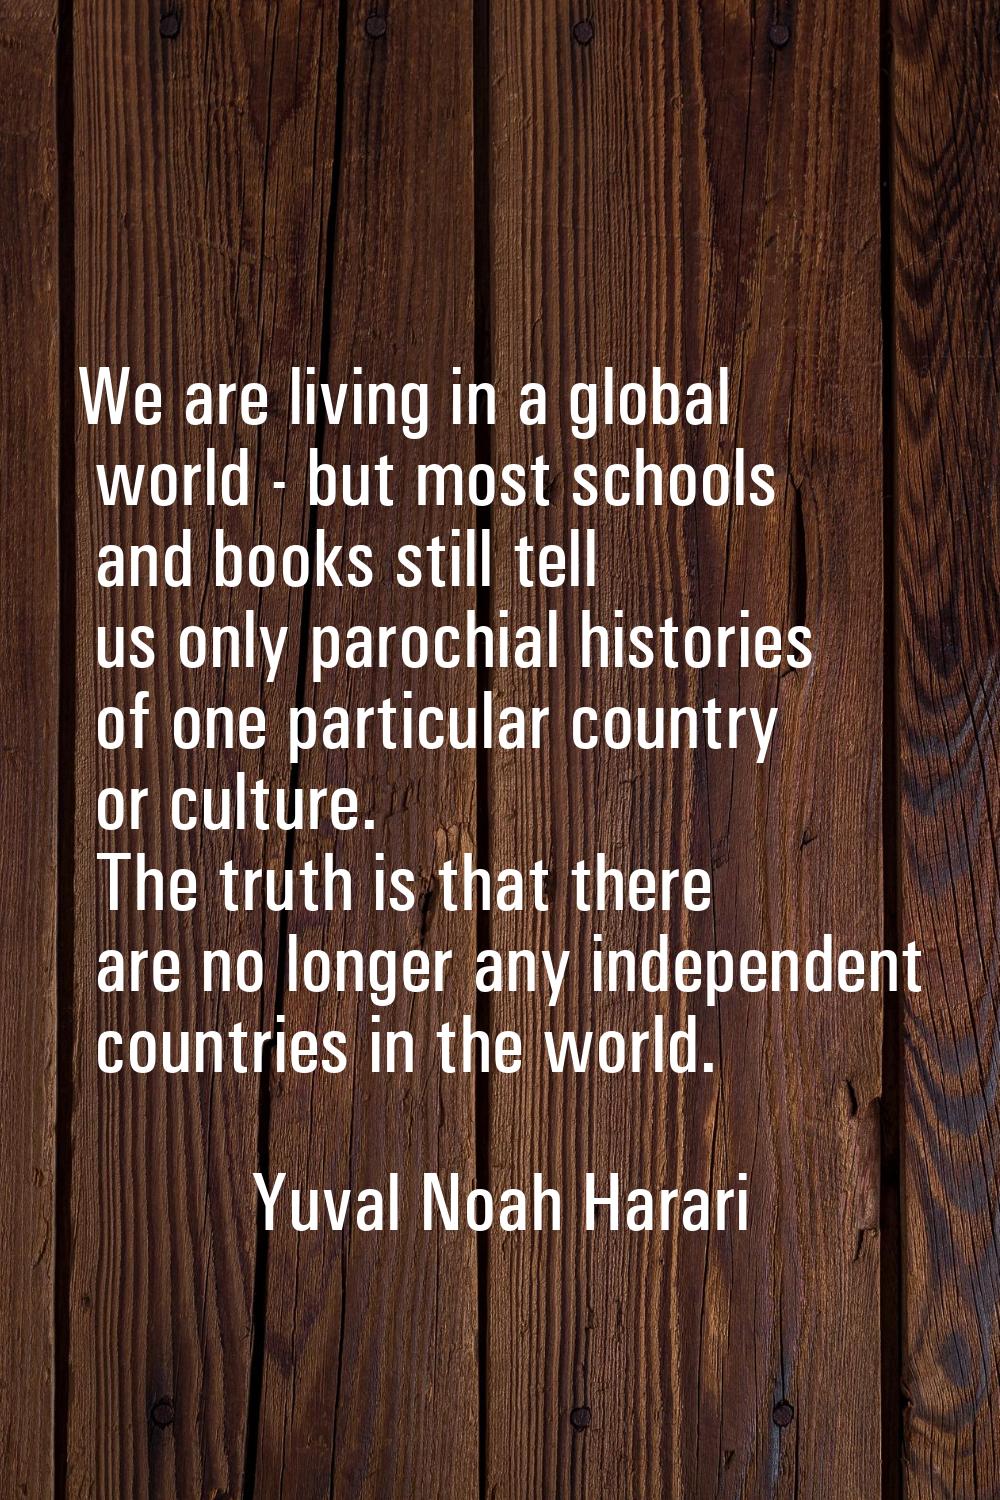 We are living in a global world - but most schools and books still tell us only parochial histories